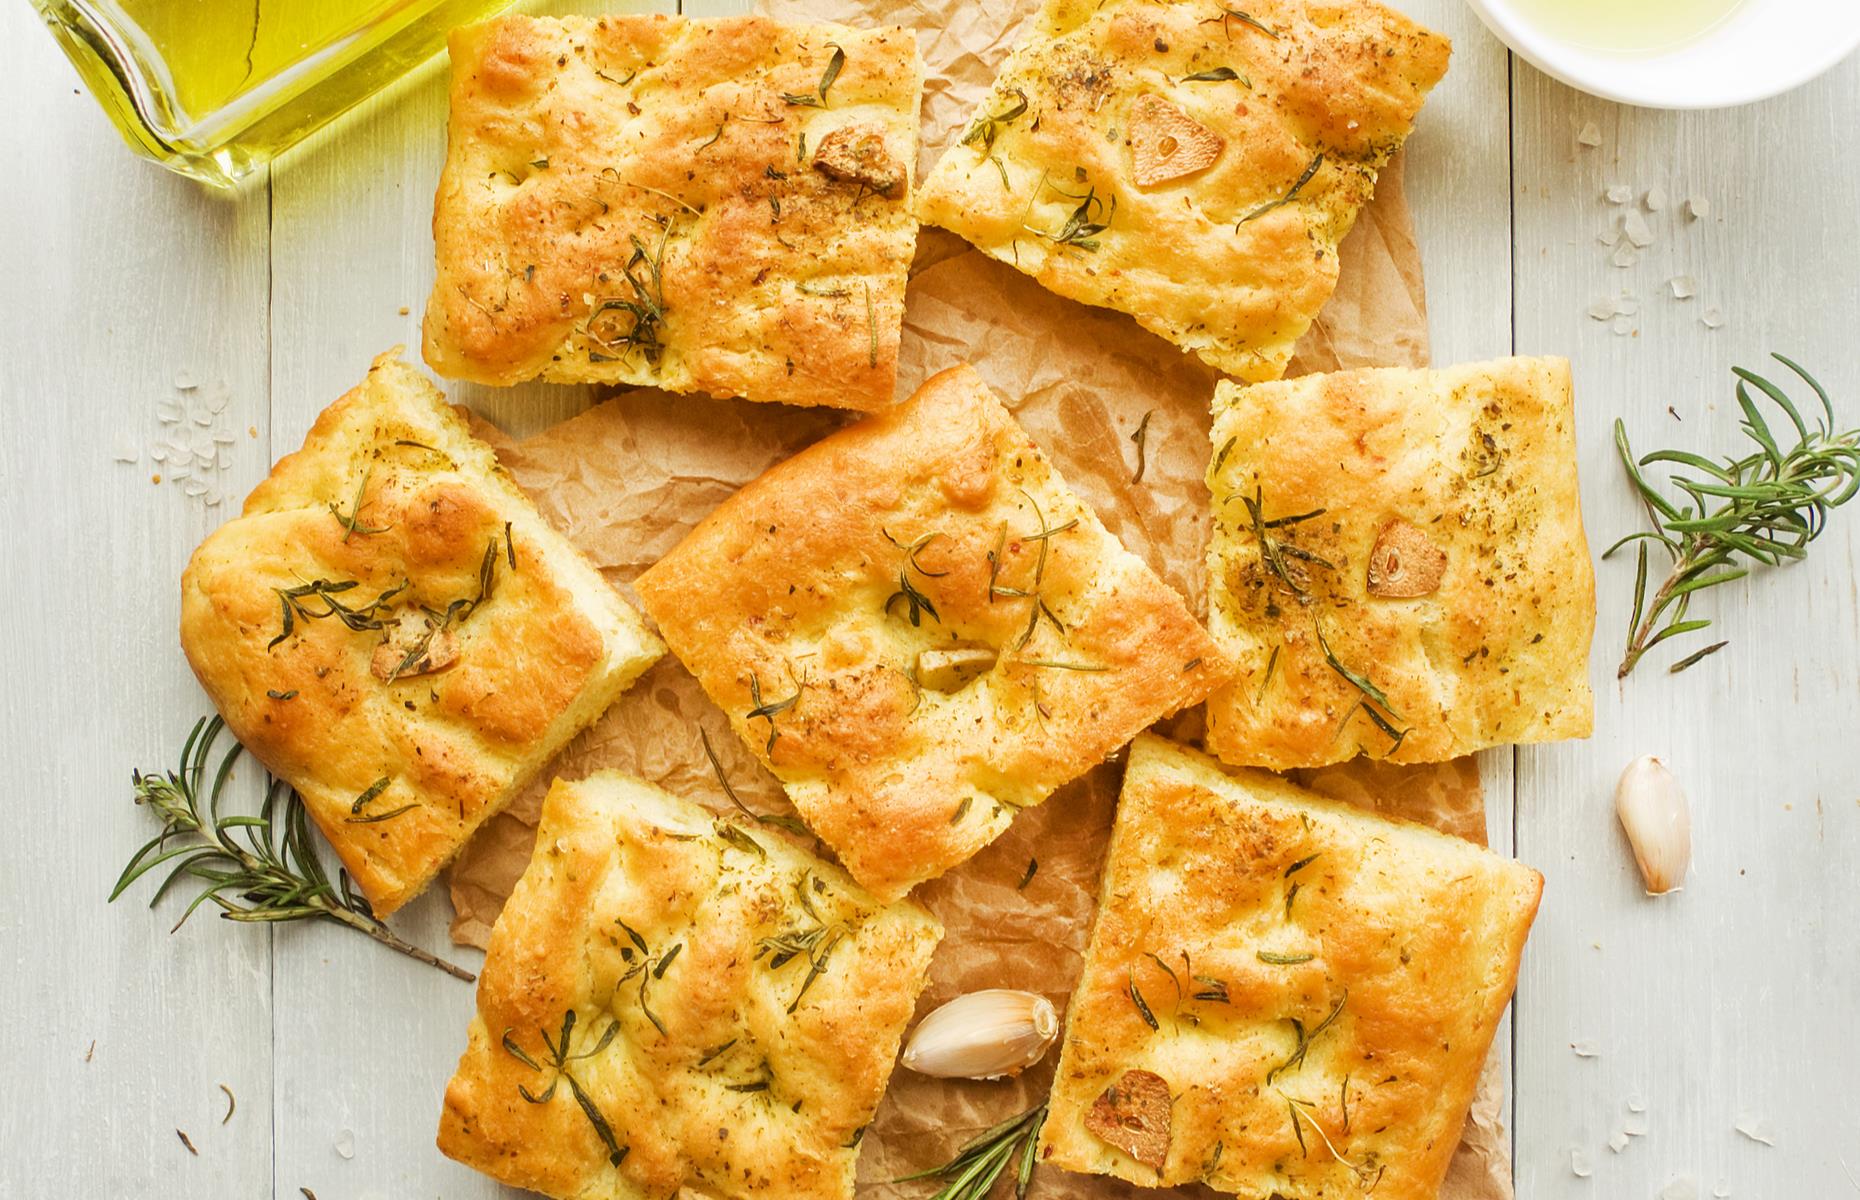 <p>Achieving the light, spongy texture, and crisp exterior of a classic focaccia without gluten is no mean feat, but this recipe has it sorted. It calls for a mix of different gluten-free flours, including potato flour and cornflour, and is laced with garlic and fresh rosemary. The addition of vitamin C powder (which you can get from a pharmacy) helps to improve the structure.</p>  <p><a href="https://www.lovefood.com/recipes/60668/gluten-free-foccacia"><strong>Get the recipe for gluten-free focaccia here</strong></a></p>